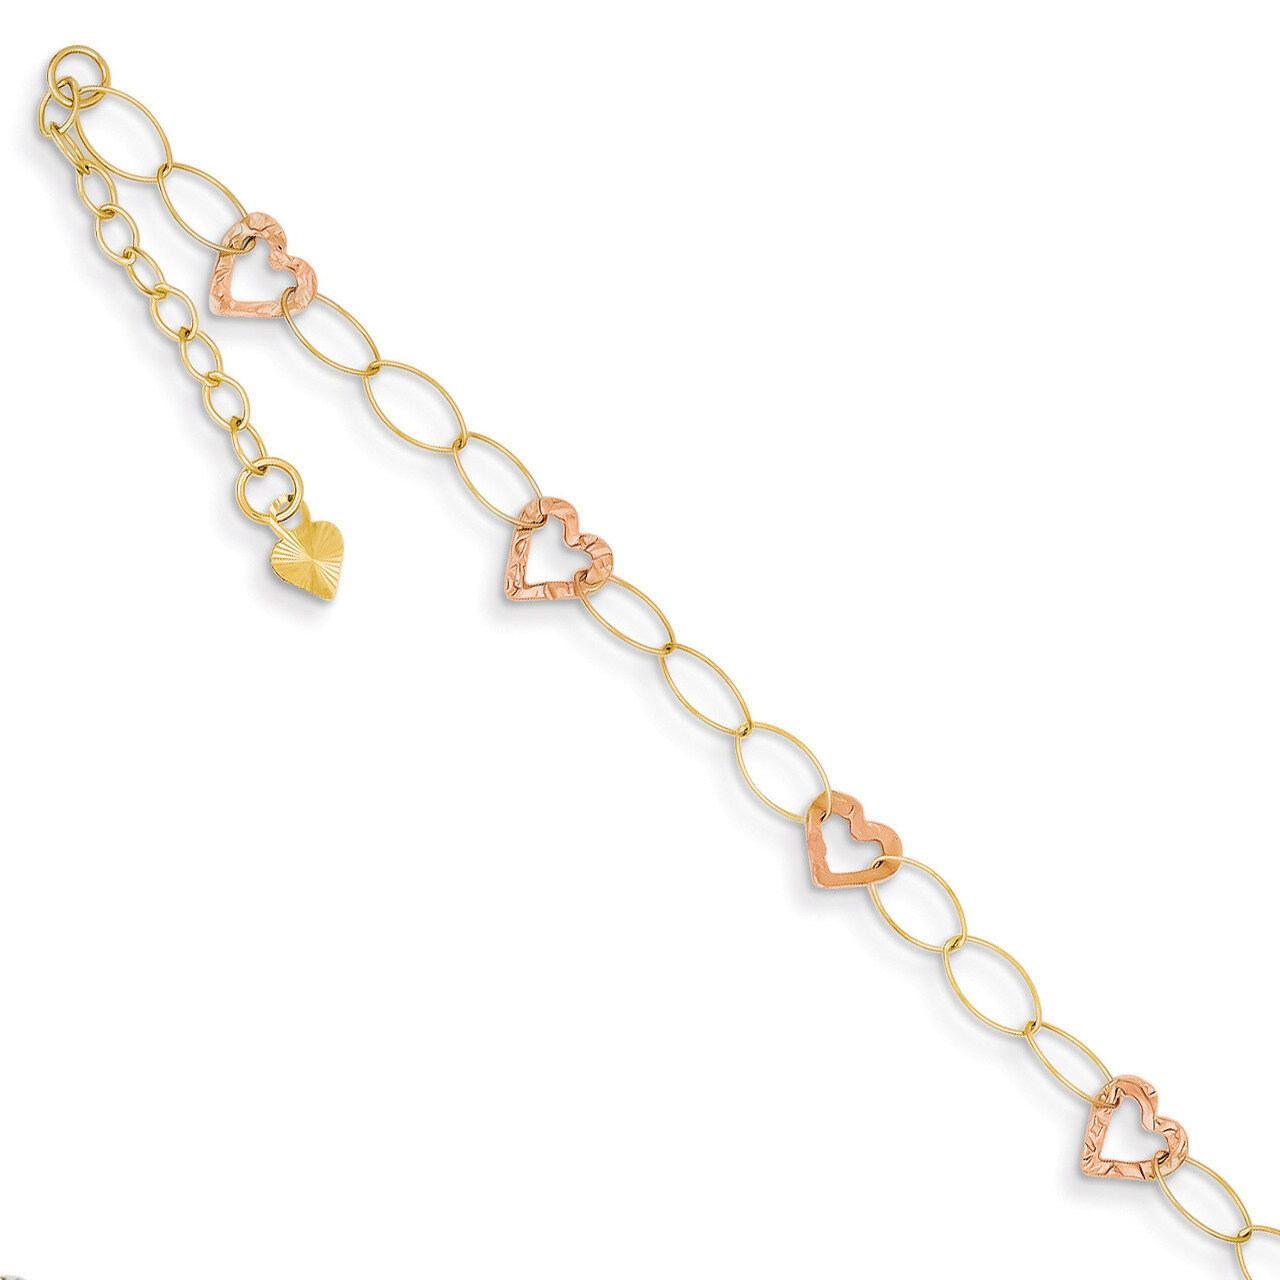 Adjustable Heart with 1 extension Anklet 9 Inch 14k Two-Tone Gold ANK171-9